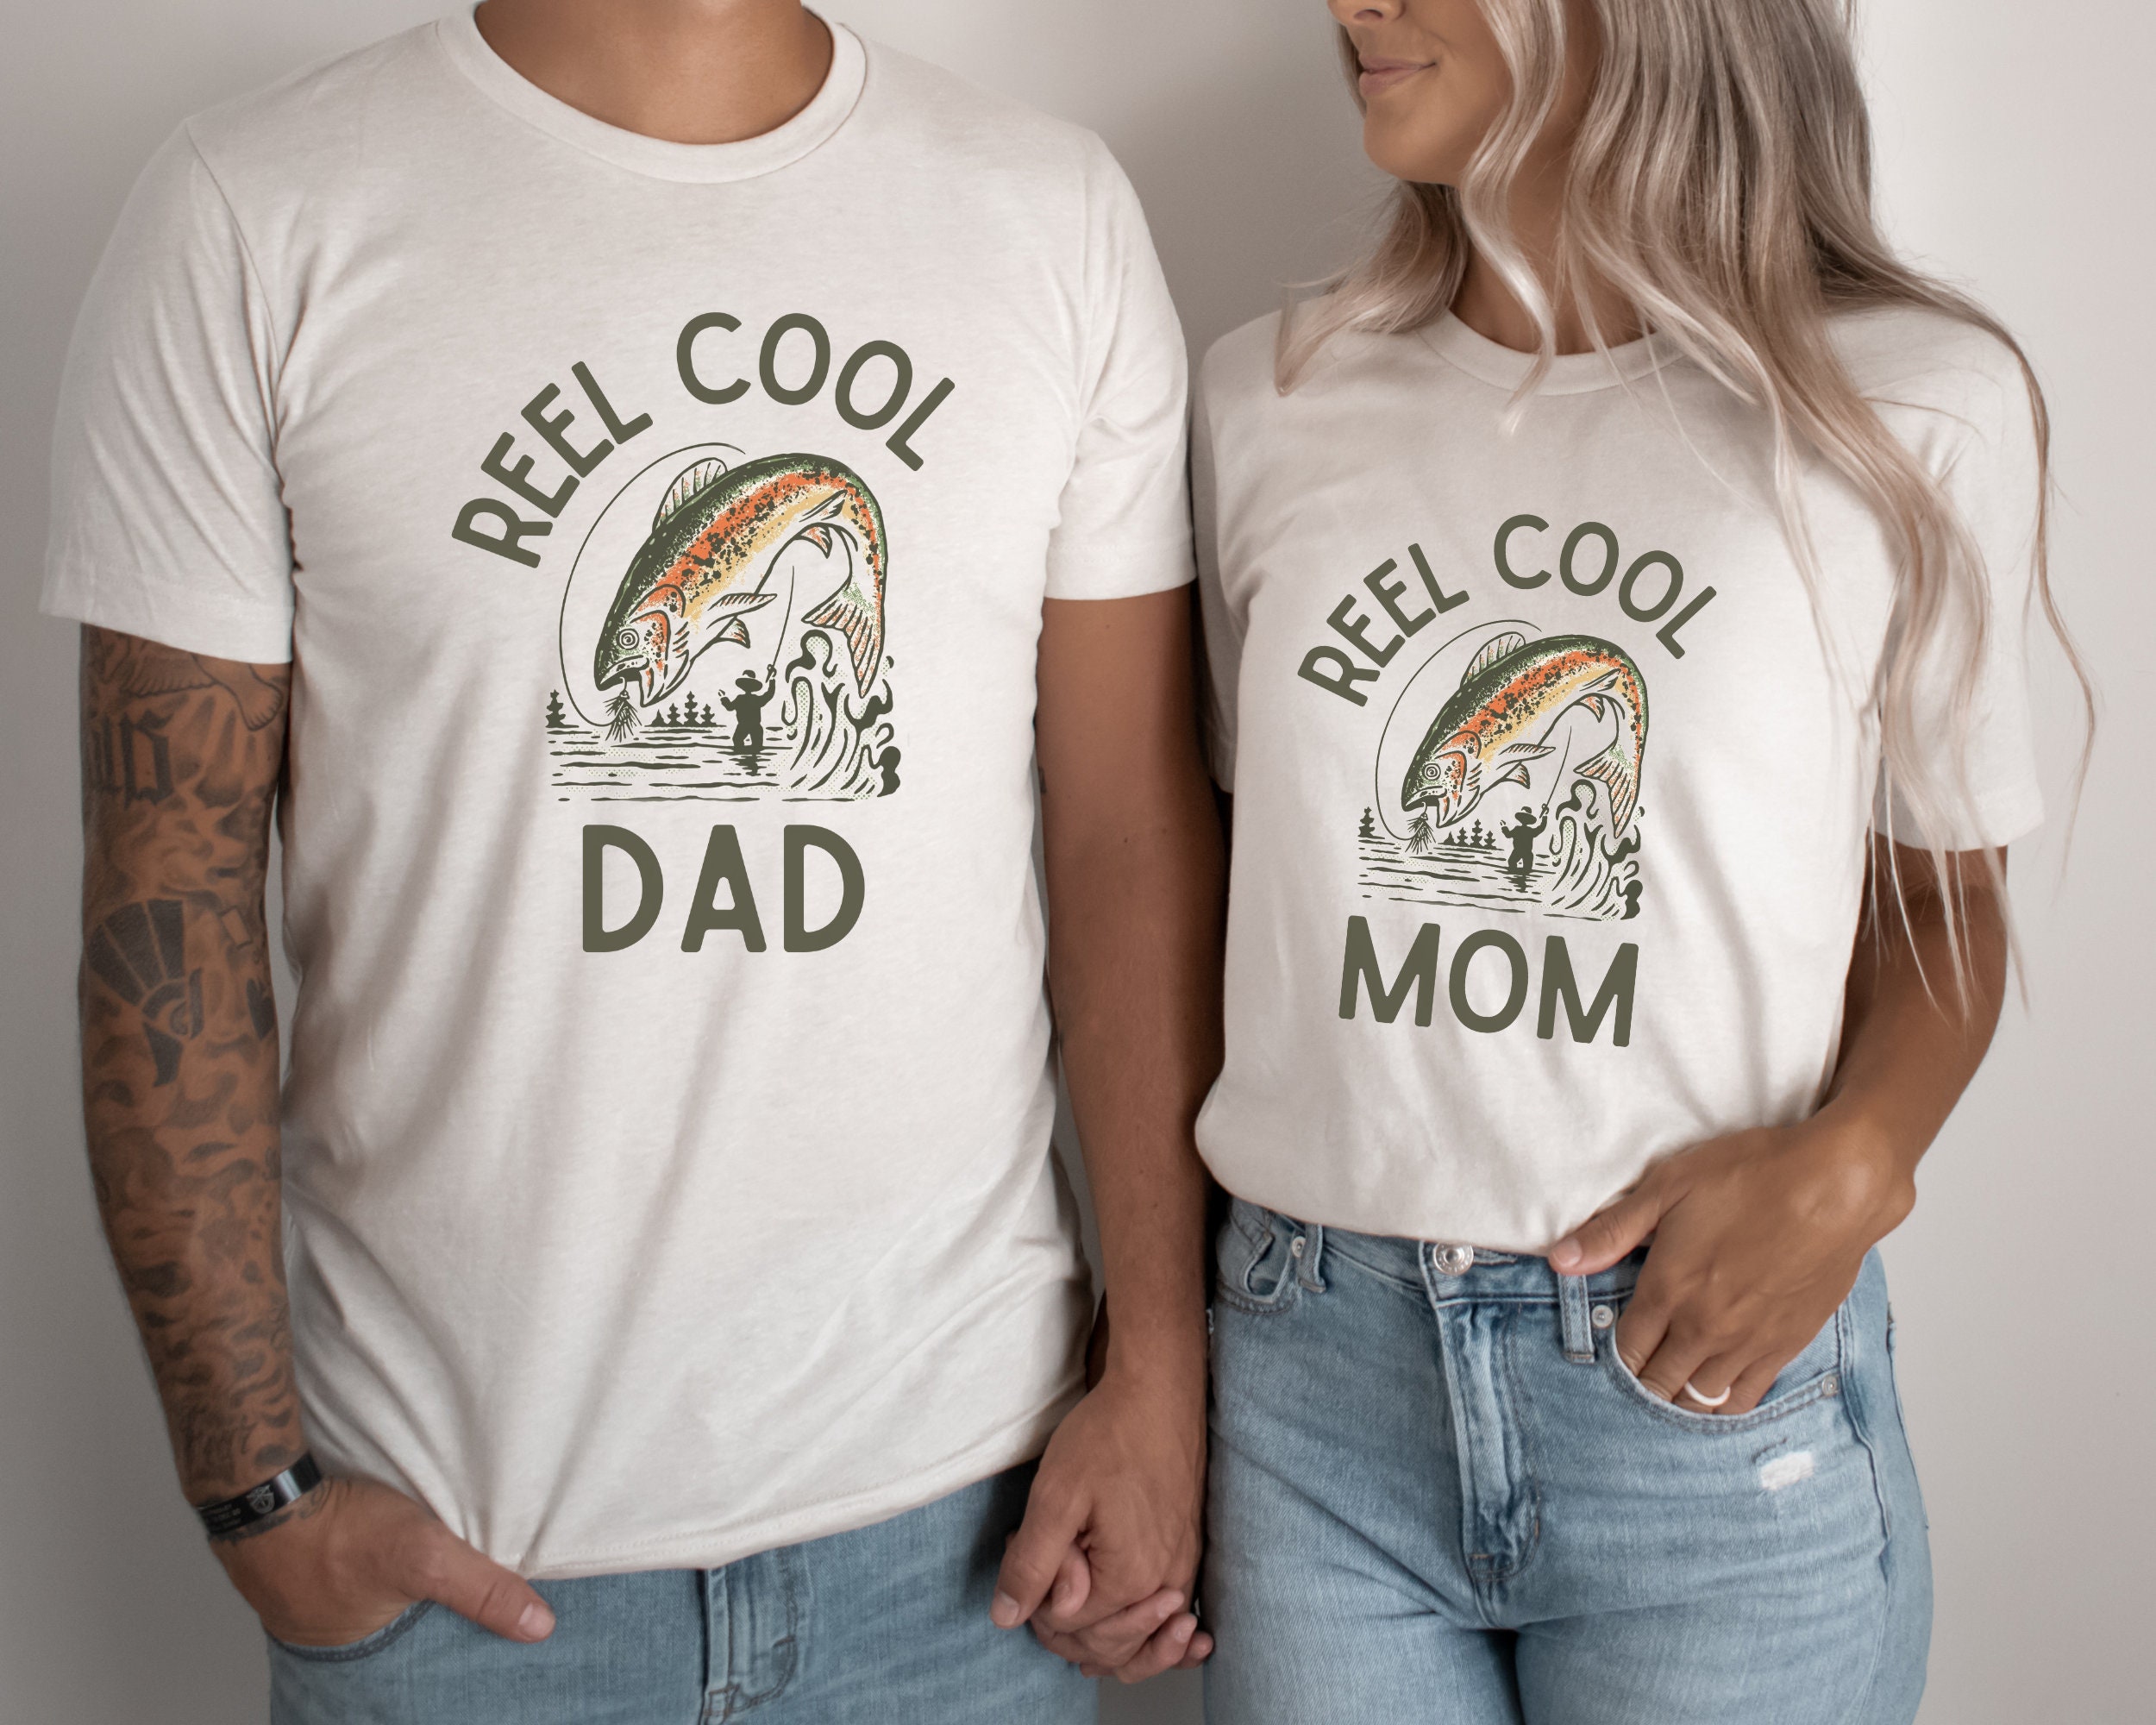 Reel Cool Mom, Dad Matching T-Shirts | New Parents Gift | Cute Pregnancy,  Baby Announcement Idea | Fly Fishing Family | Rainbow Trout Design